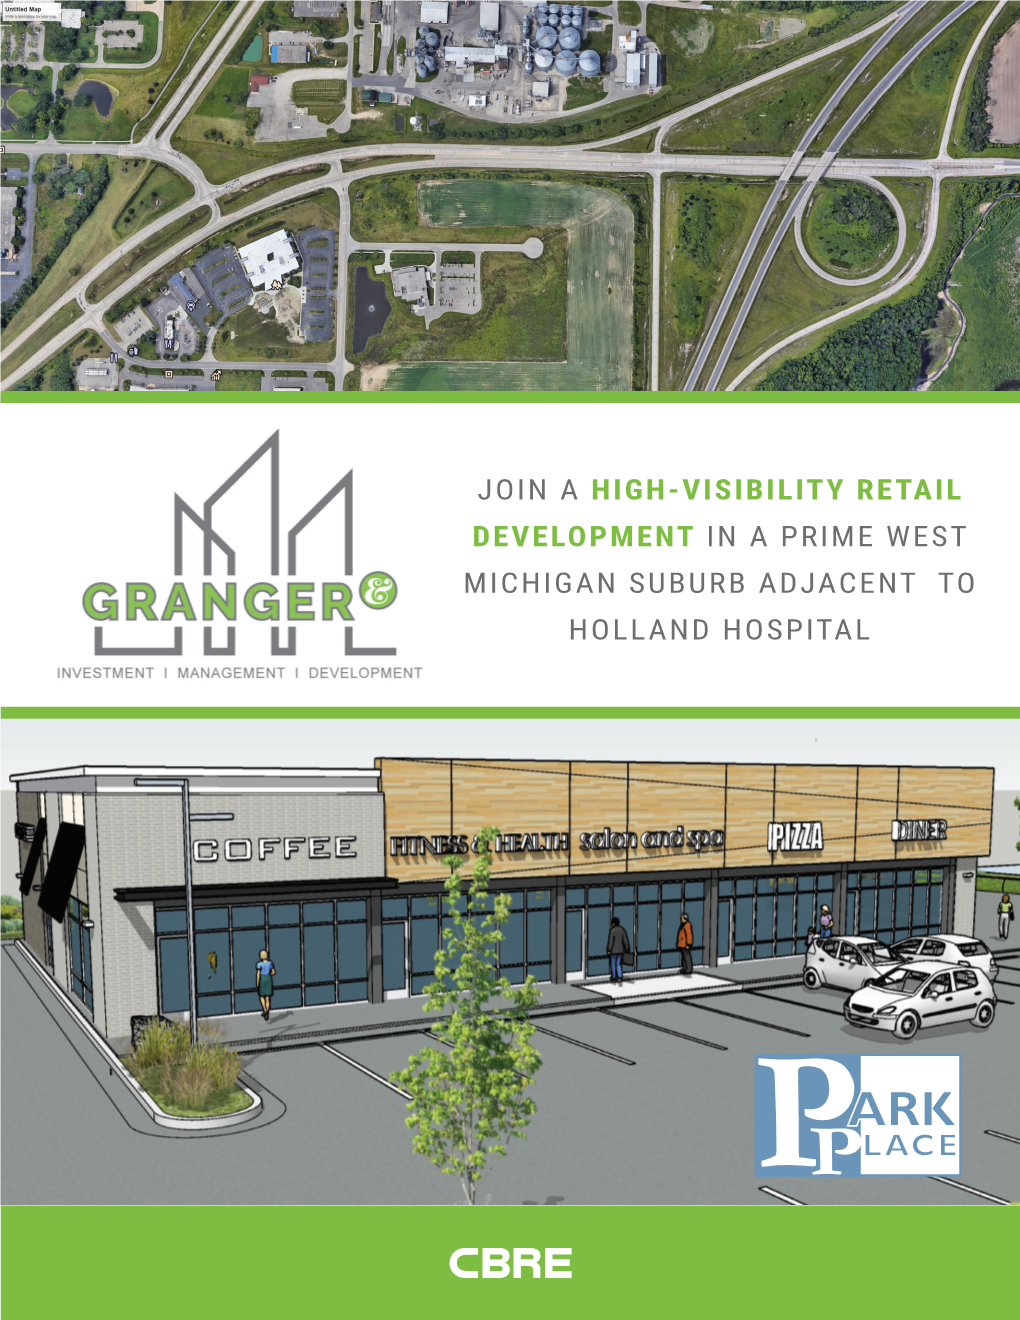 Join a High-Visibility Retail Development in a Prime West Michigan Suburb Adjacent to Holland Hospital